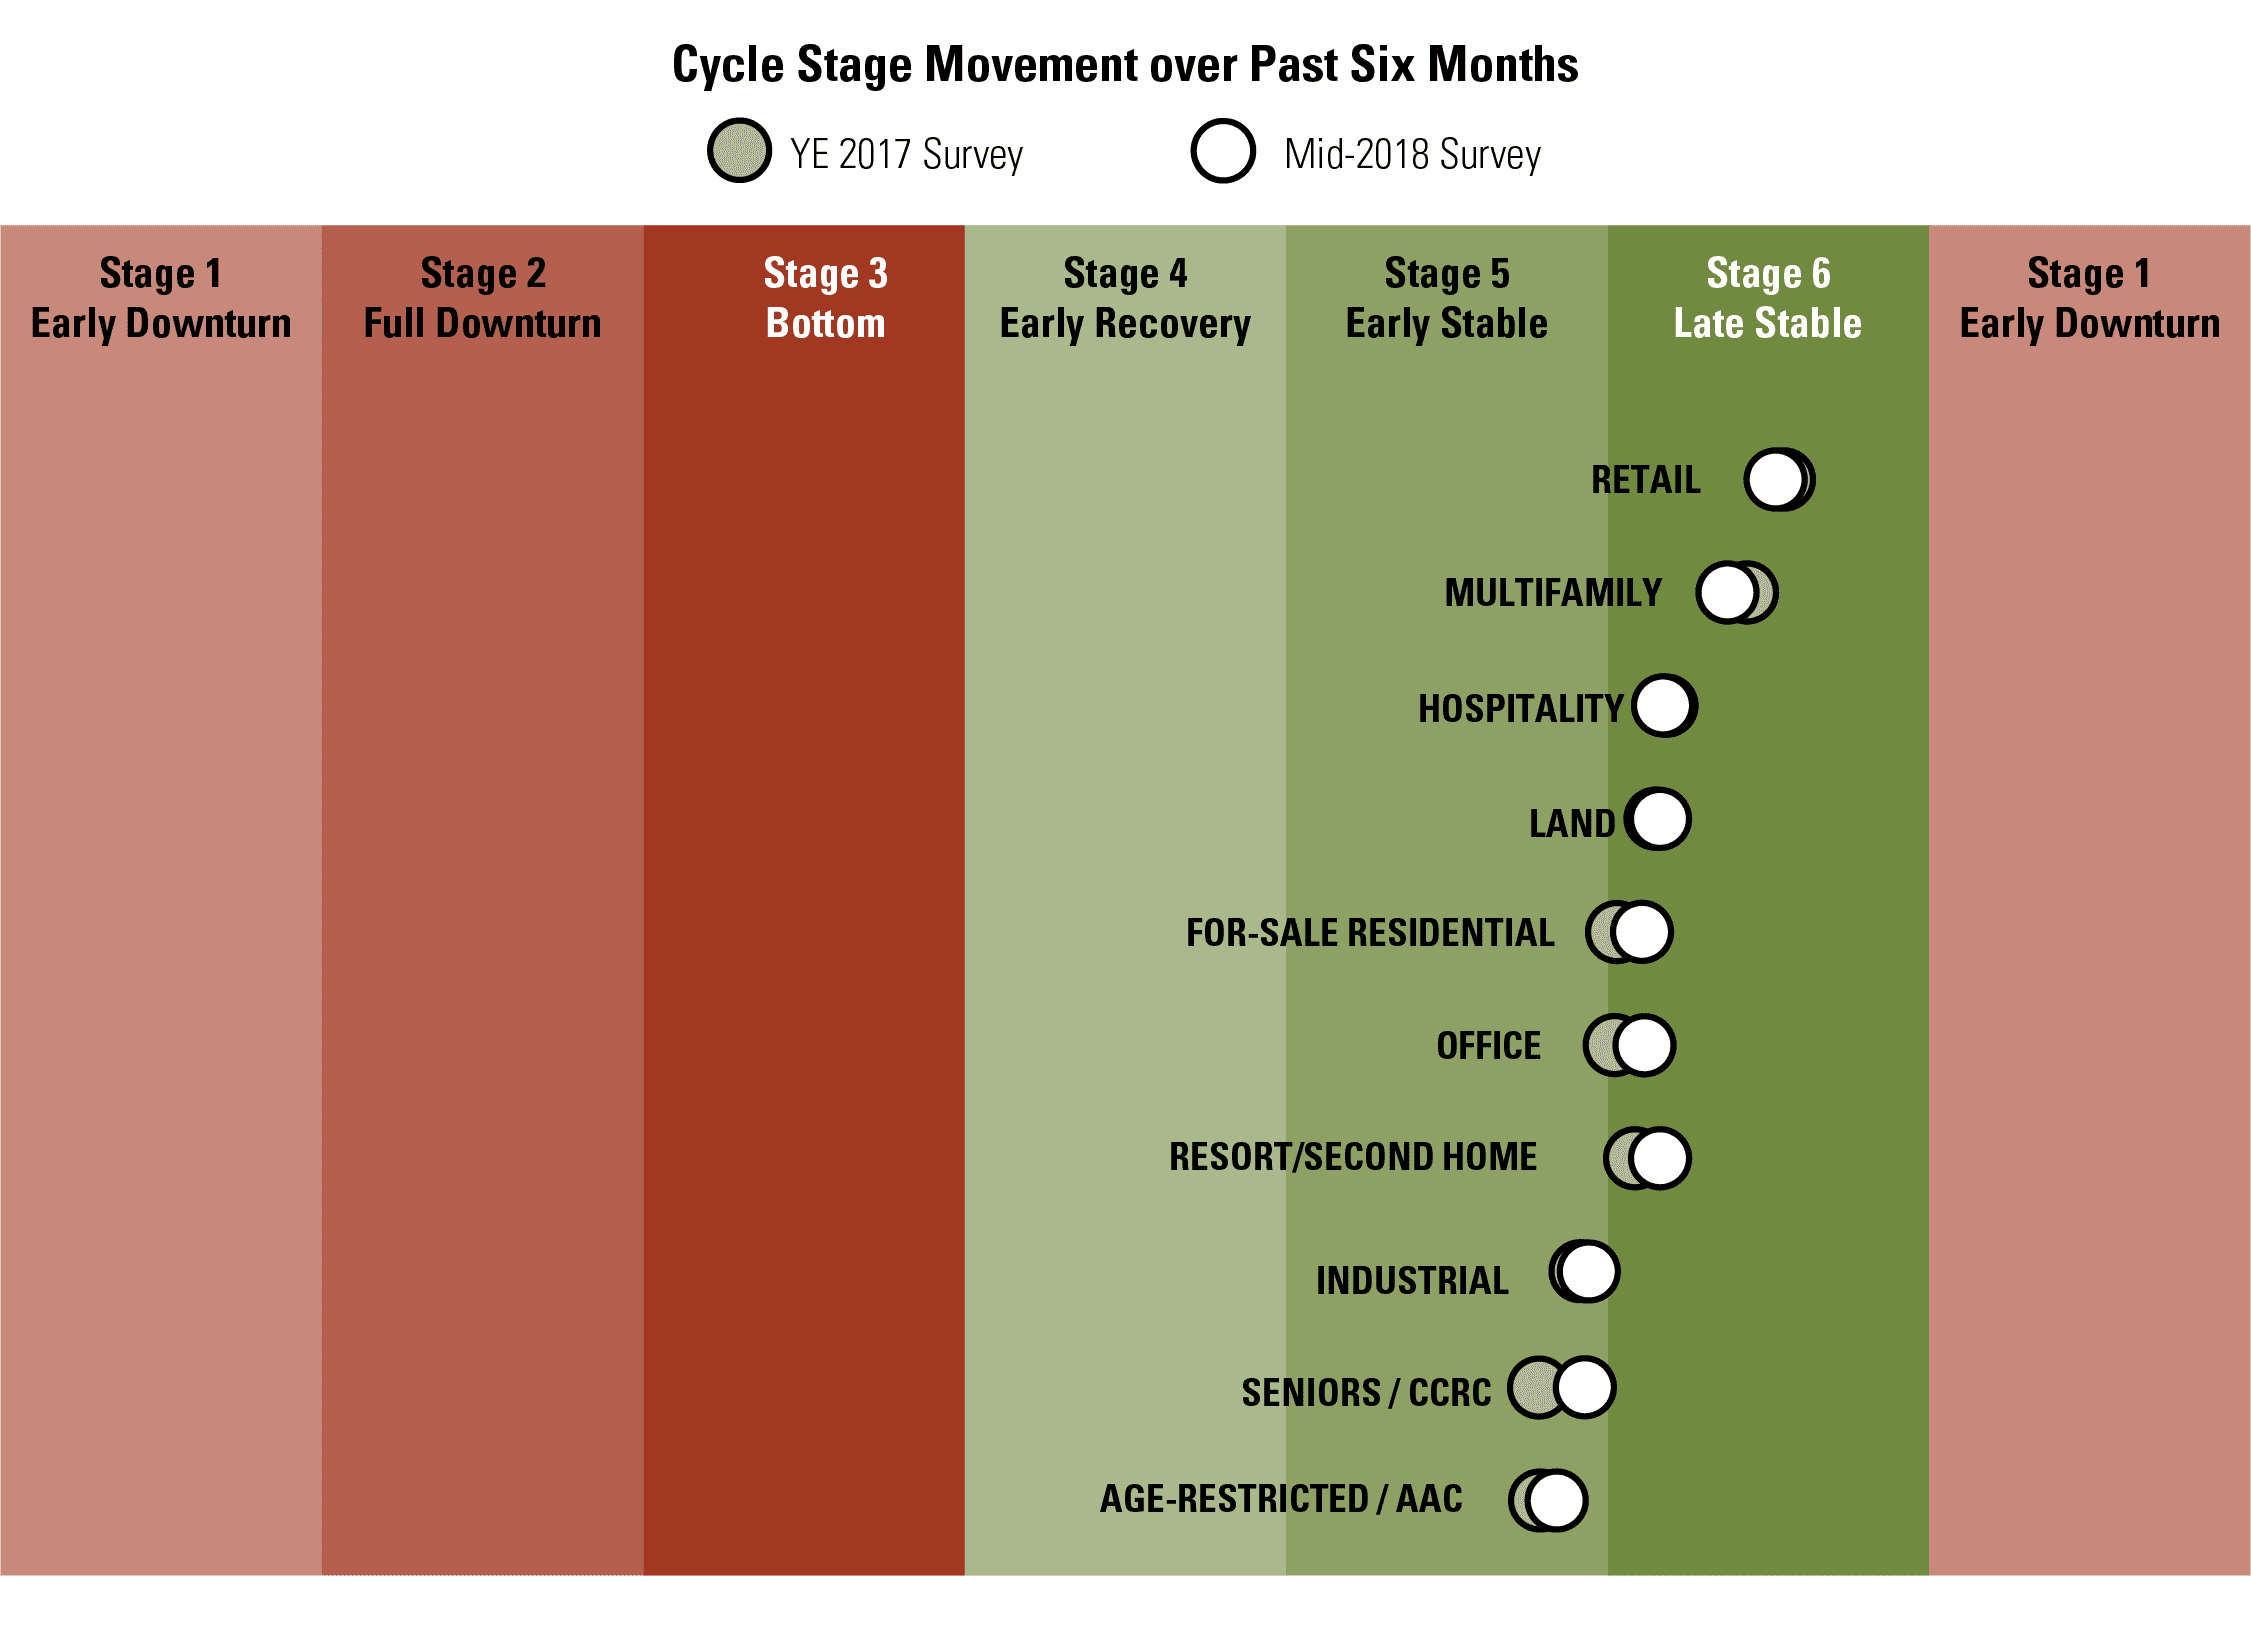 Cycle Stage Movement over Past Six Months